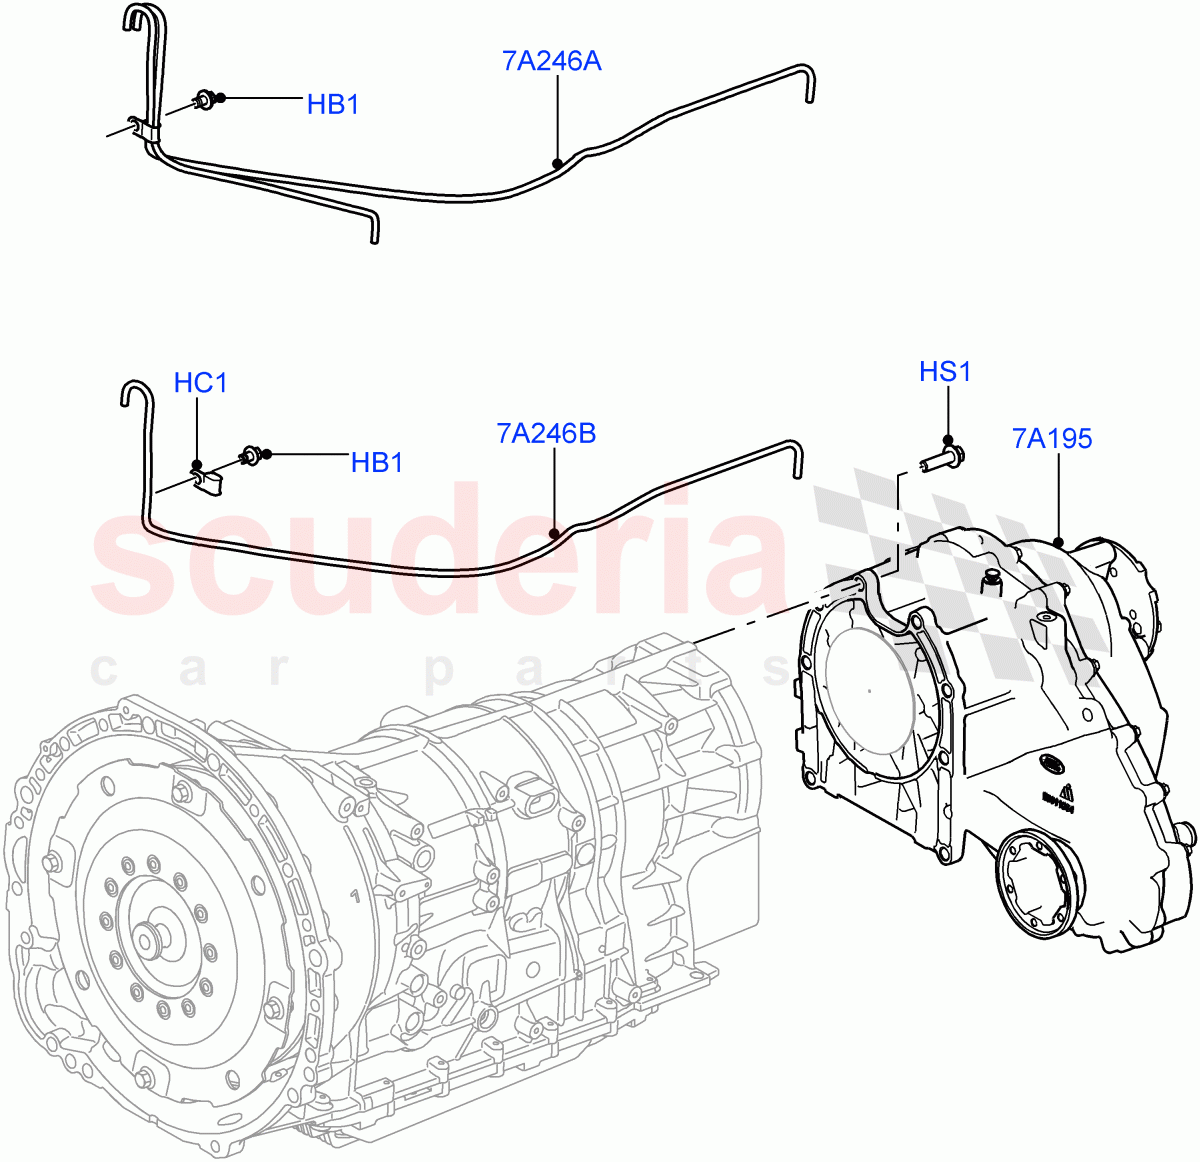 Transfer Drive Case(8 Speed Auto Trans ZF 8HP70 4WD,With 1 Speed Transfer Case,8 Speed Auto Trans ZF 8HP45)((V)FROMEA000001,(V)TOGA999999) of Land Rover Land Rover Discovery 4 (2010-2016) [3.0 DOHC GDI SC V6 Petrol]